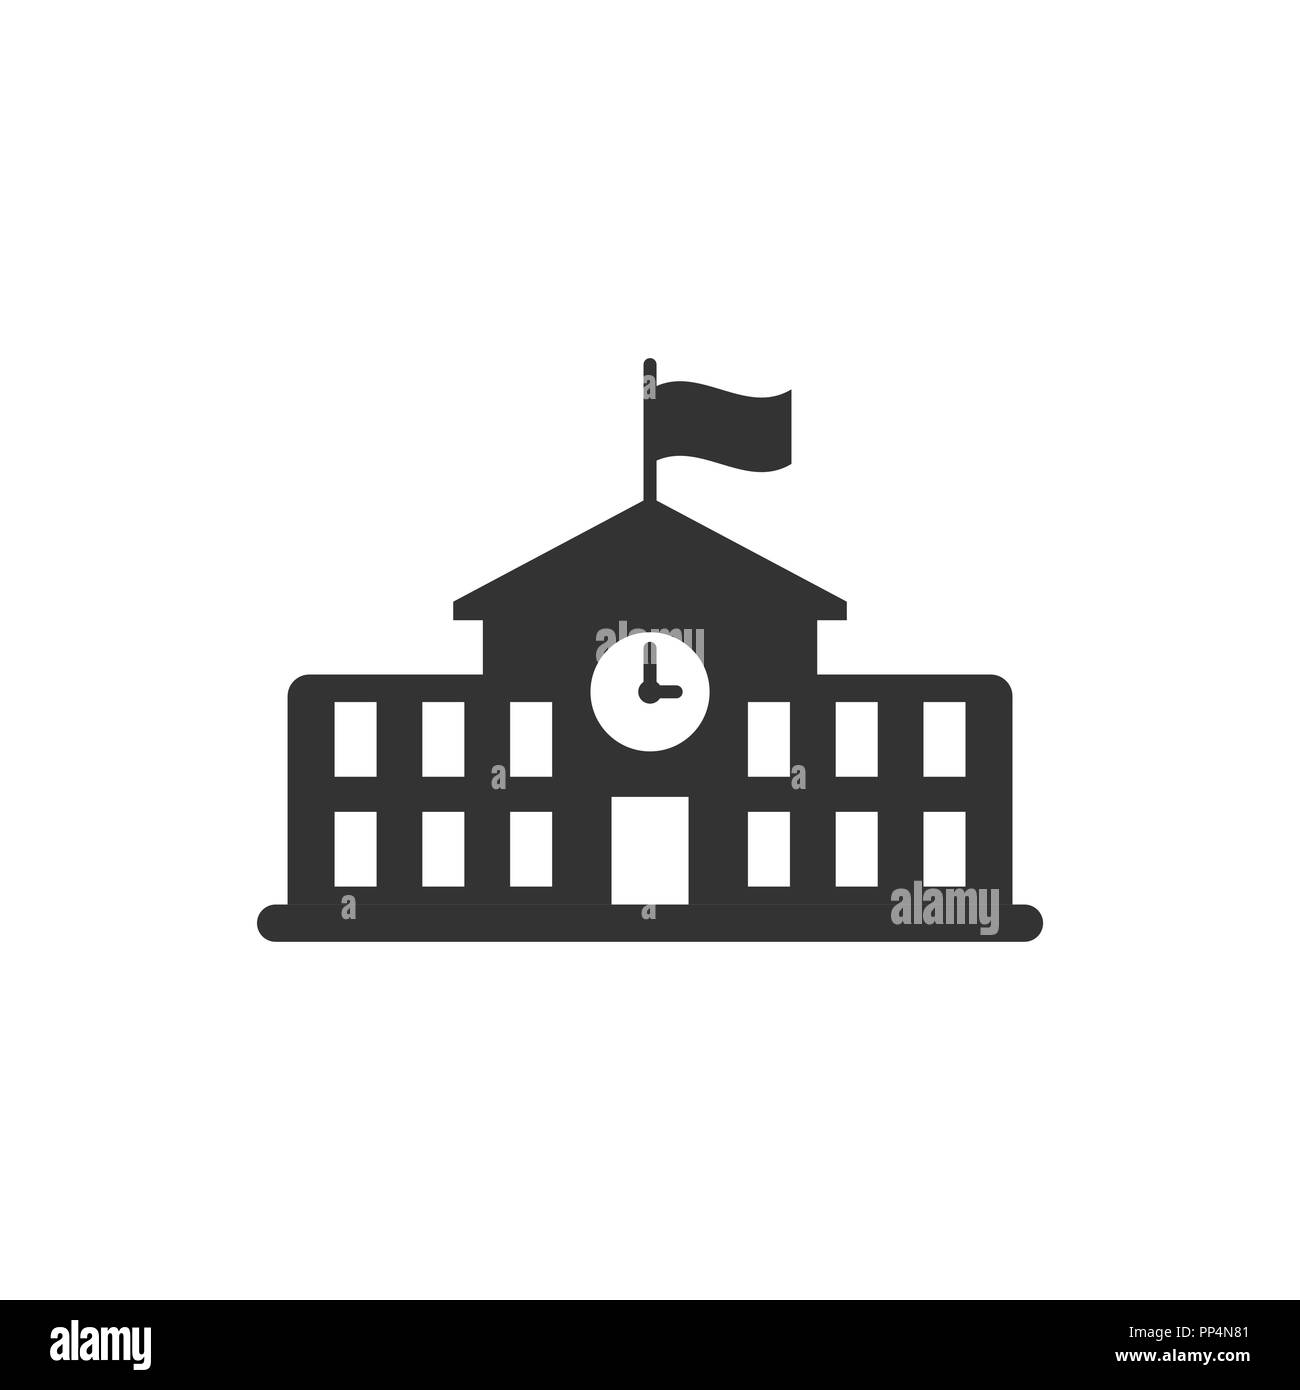 School building icon in flat style. College education vector illustration on white isolated background. Bank, government business concept. Stock Vector